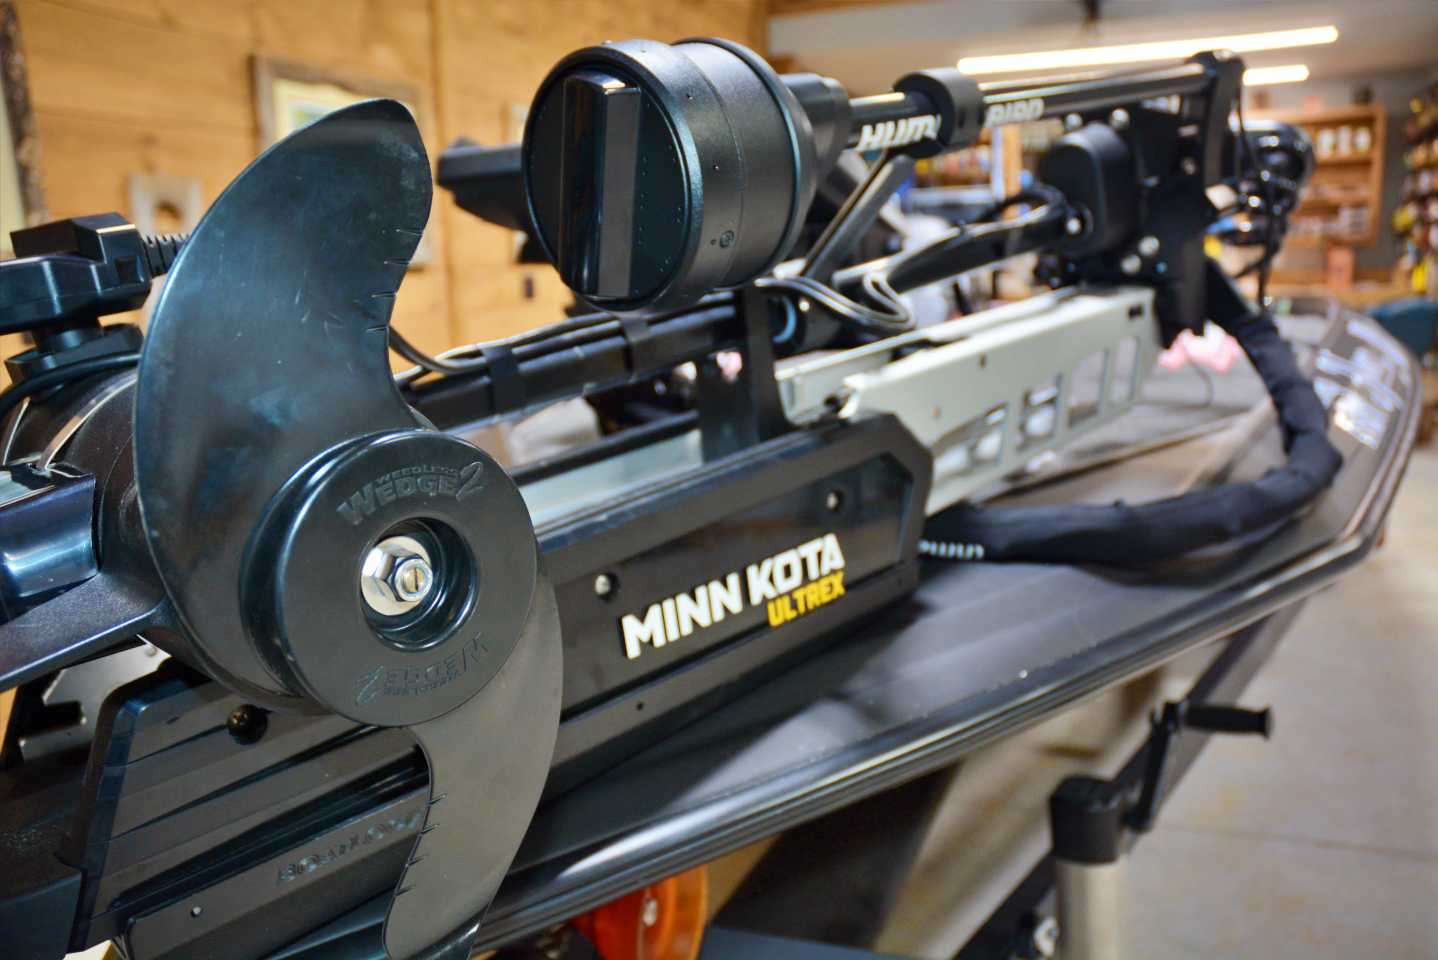 The bracket is attached to the Minn Kota Ultrex trolling motor.  